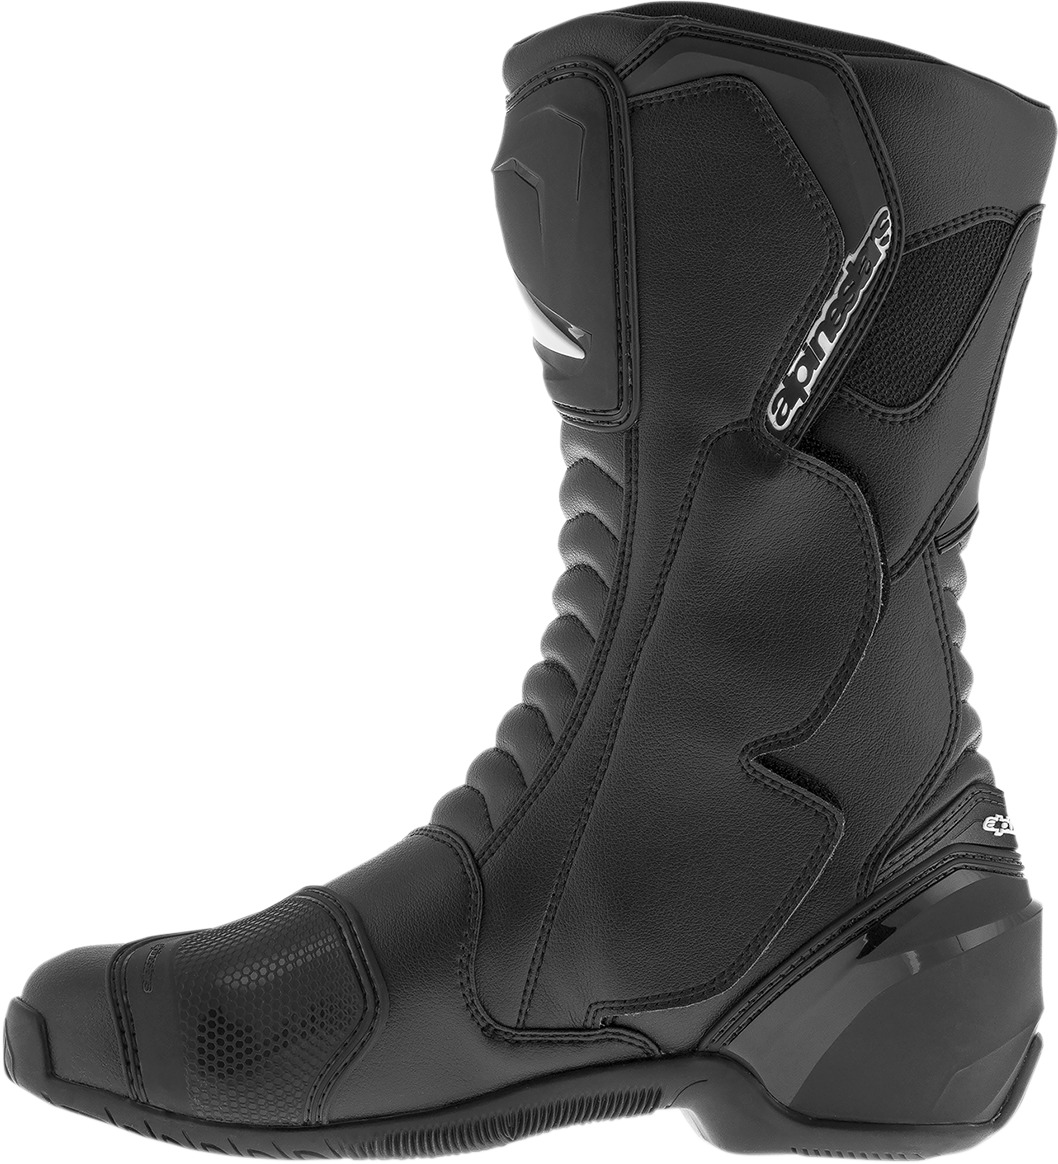 SMX-S Waterproof Street Riding Boots Black US 12.5 - Click Image to Close